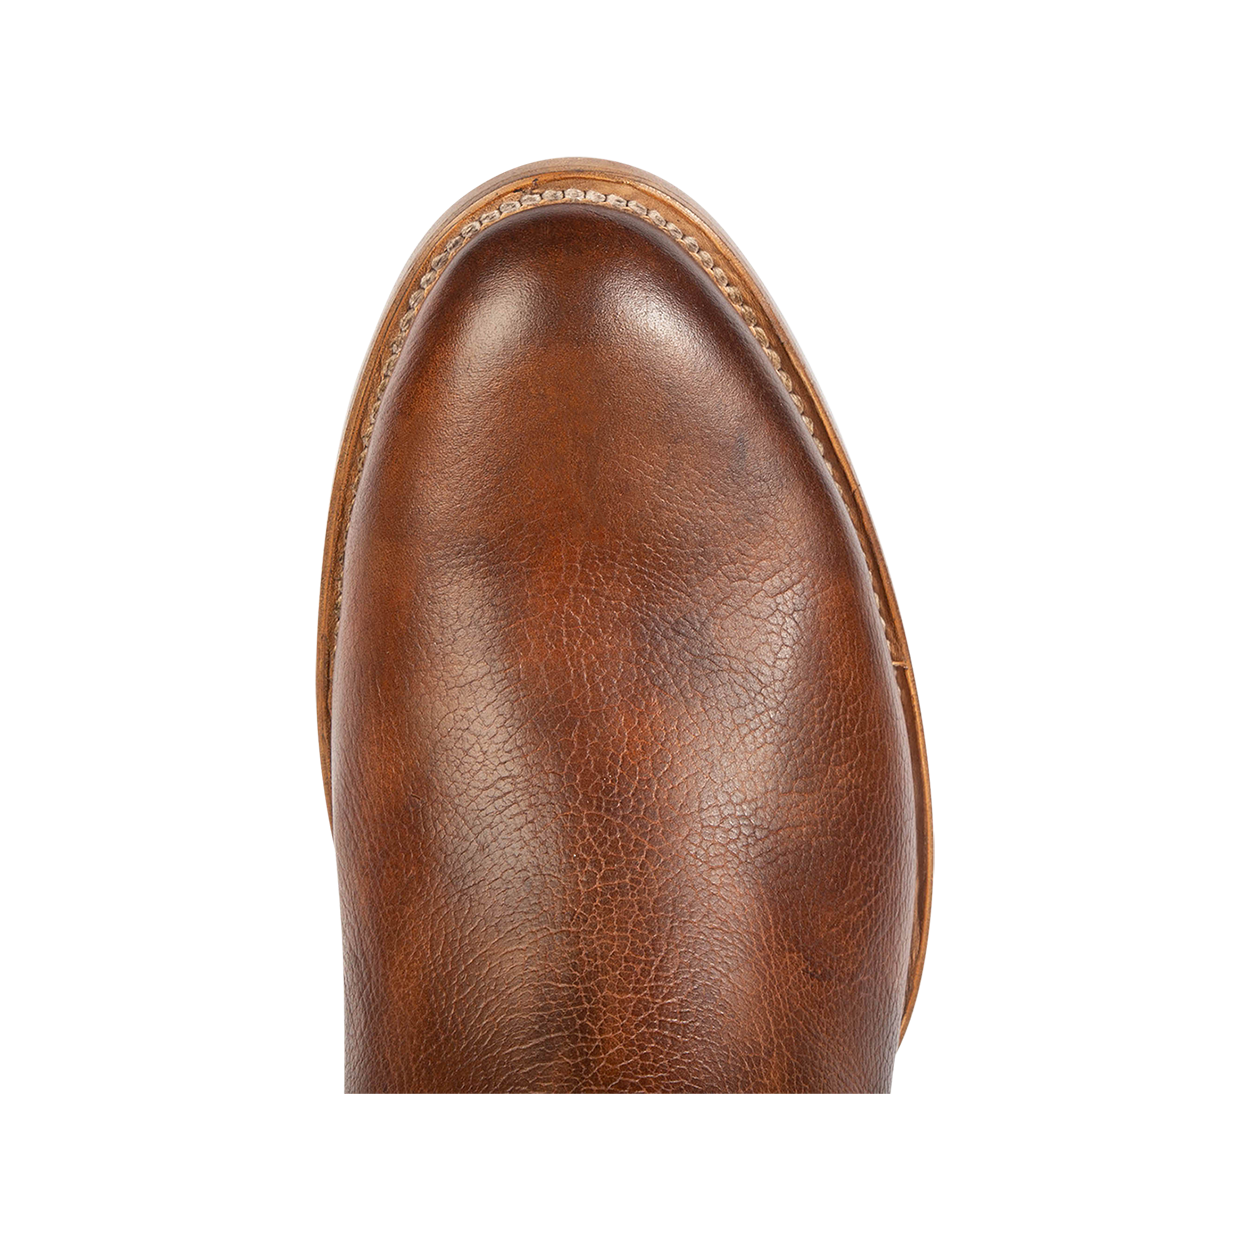 Top view showing almond toe on FREEBIRD men's Palmer brown low heeled ankle boot 